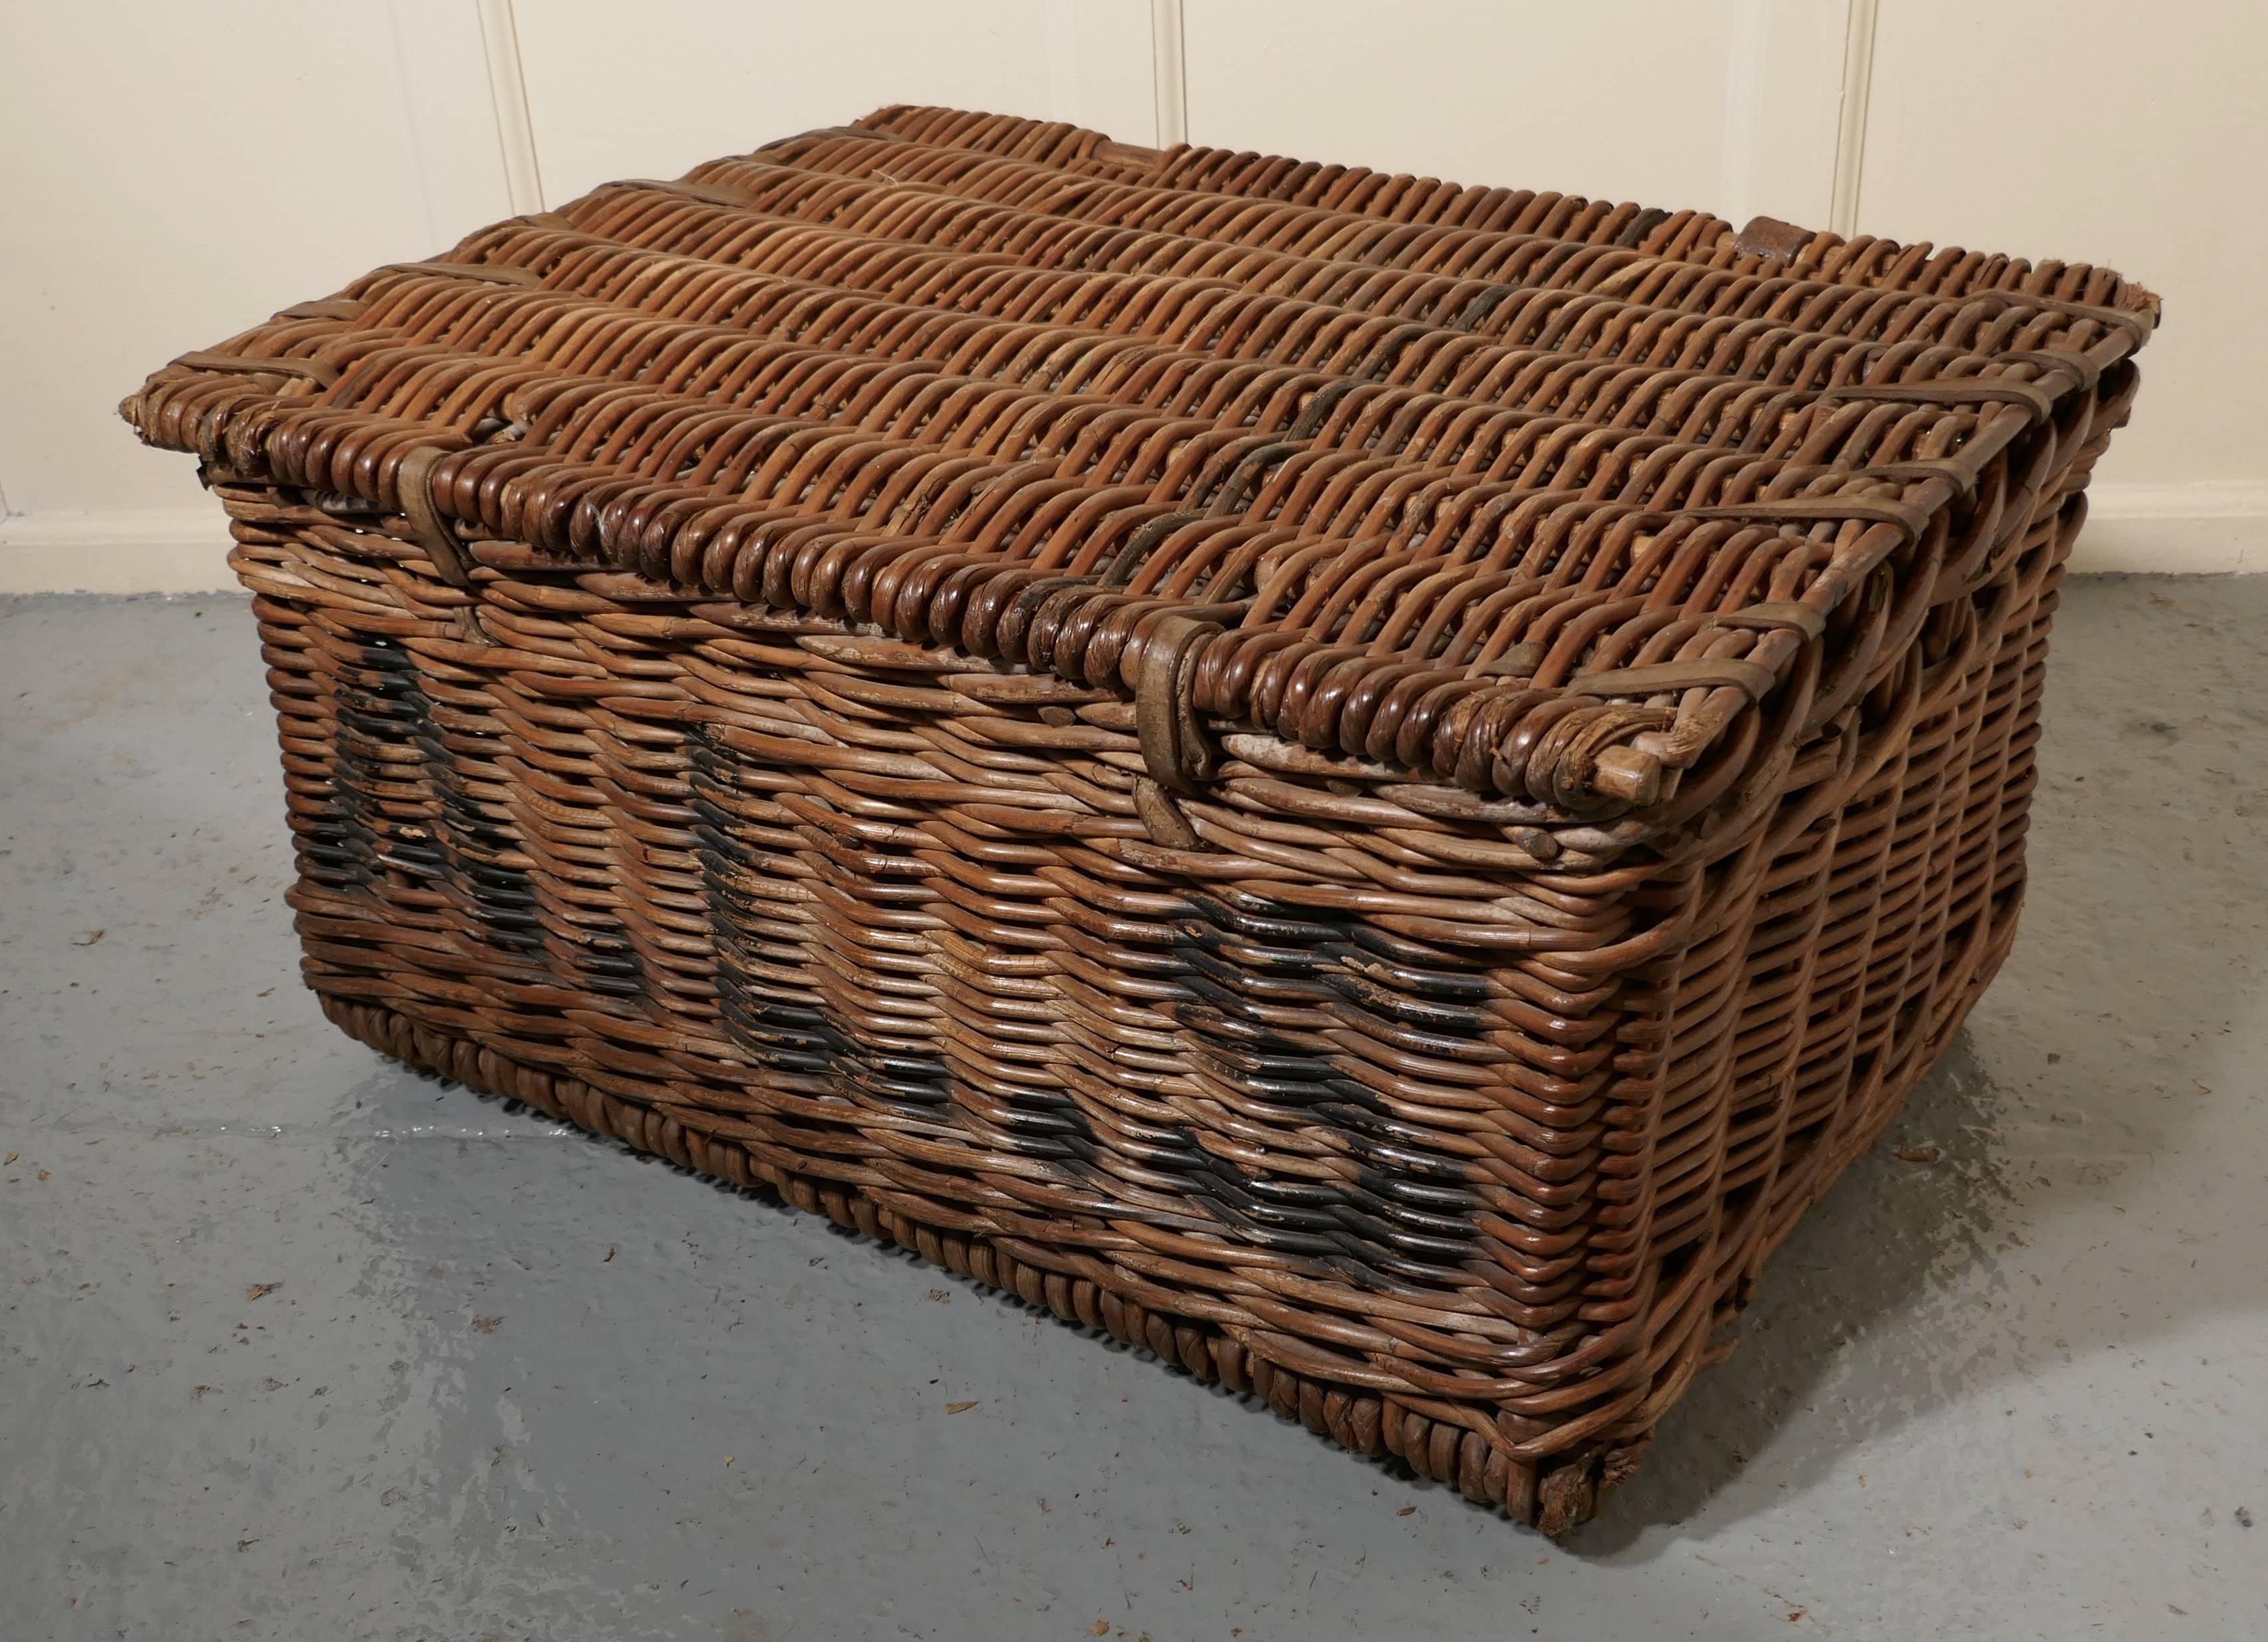 A large Victorian wicker linen basket or hamper

An attractive age darkened wicker linen basket or Hamper and it has a flat lid to the top, there are two leather fasteners on the front and the basket has a wooden frame at the bottom so it is very